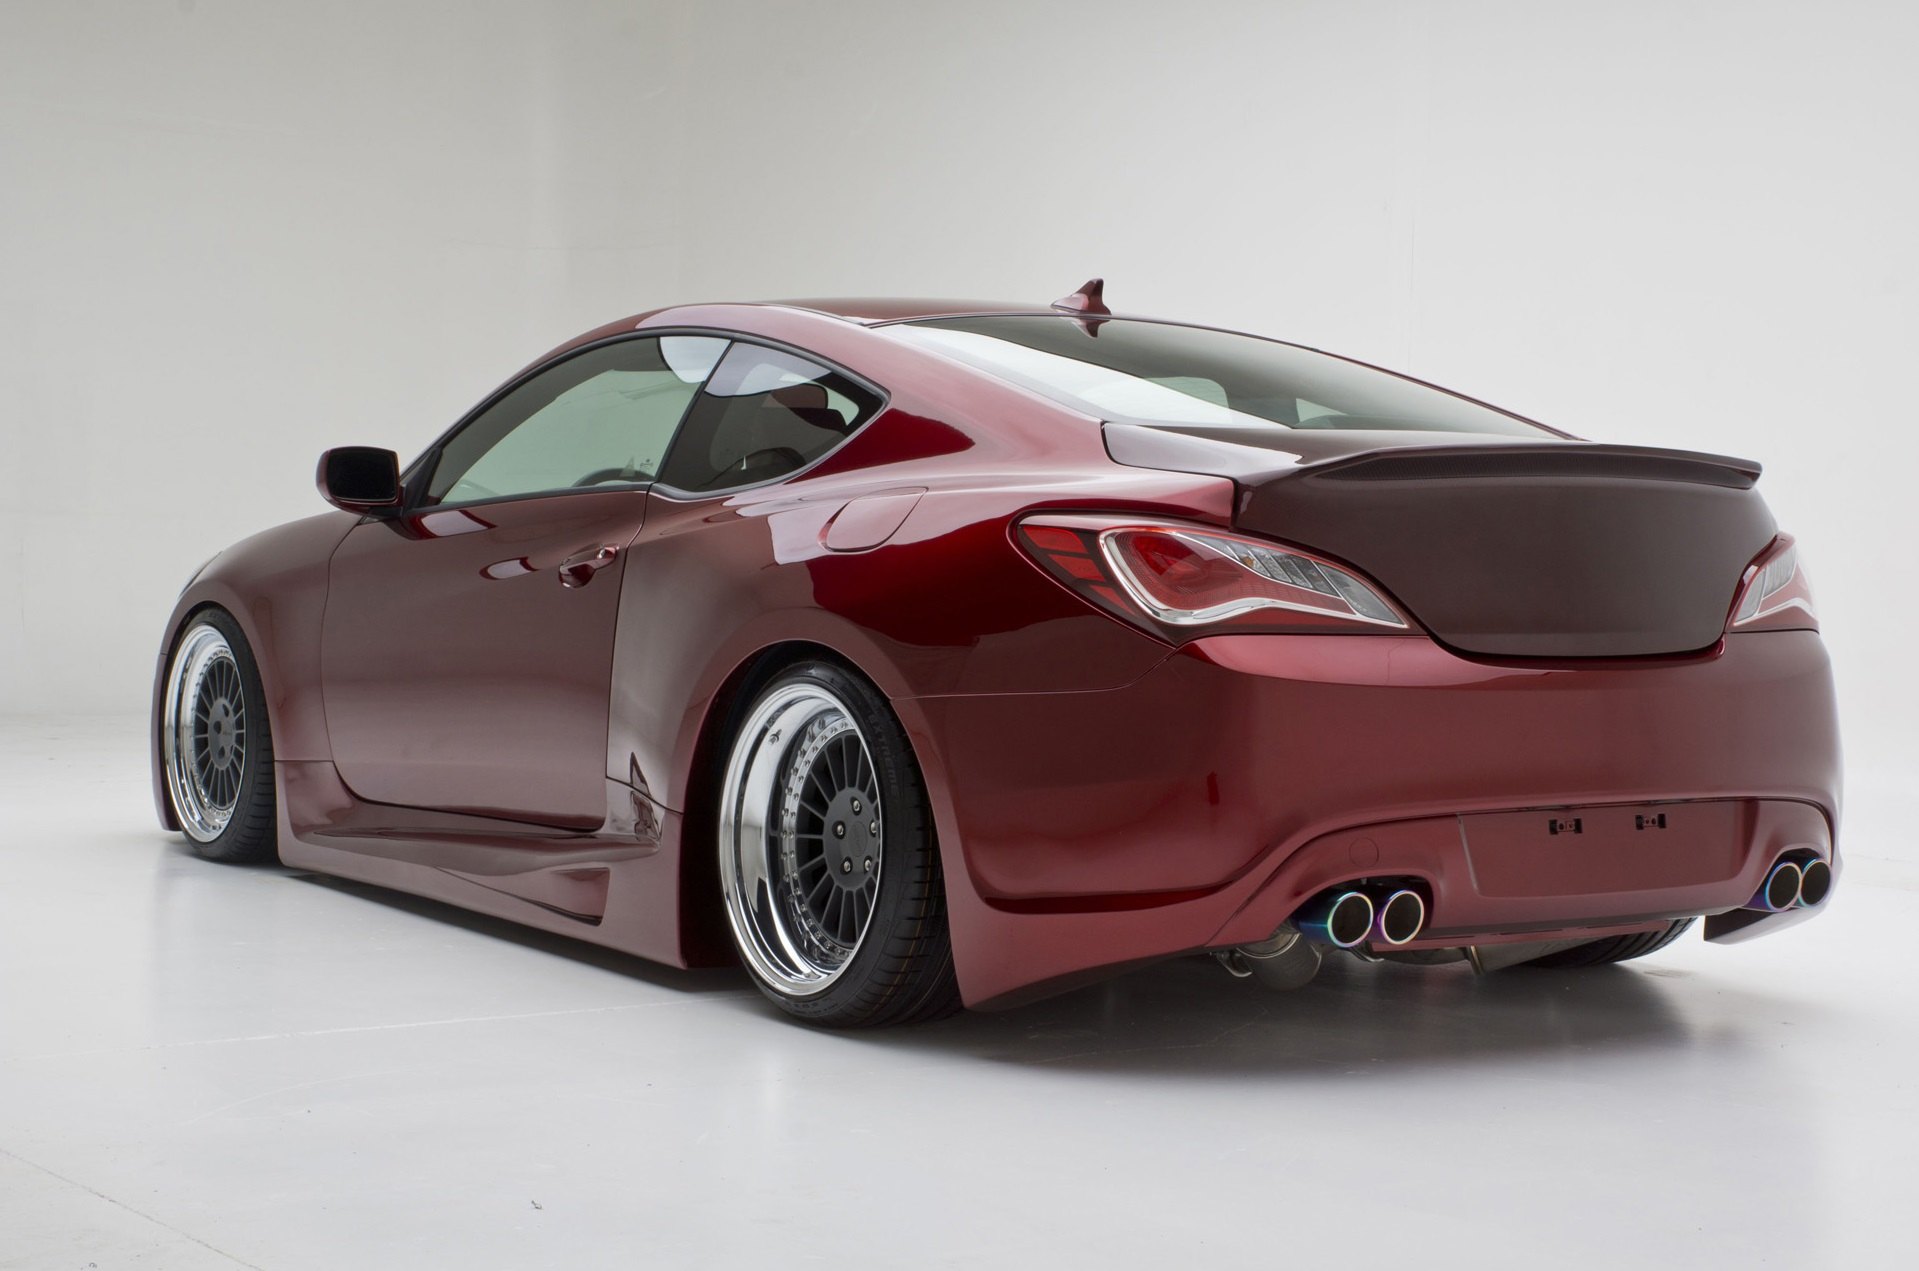 Red Hyundai Genesis Coupe with Aftermarket Rear Diffuser - Photo by Eddie Phạm